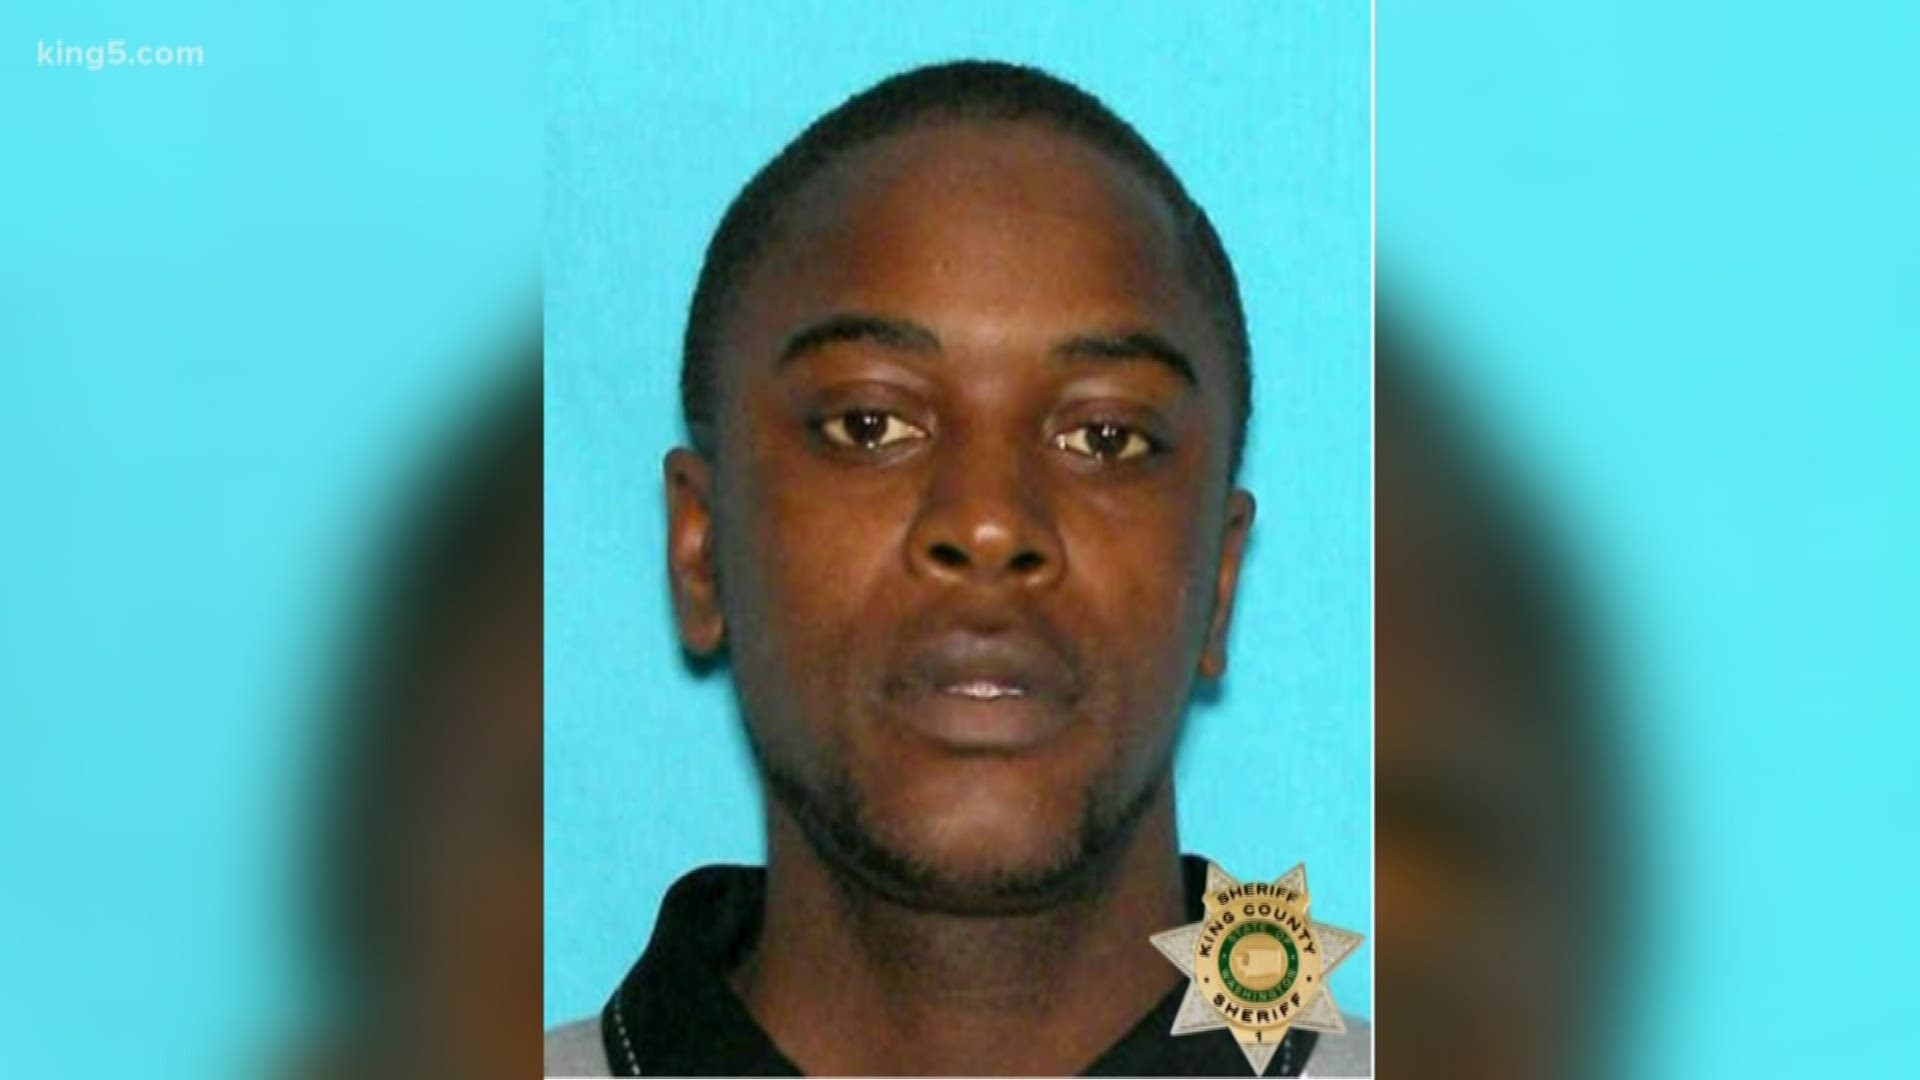 The King County Sheriff's Office have identified their suspect, they just can't find him. KING 5's Amy Moreno reports.